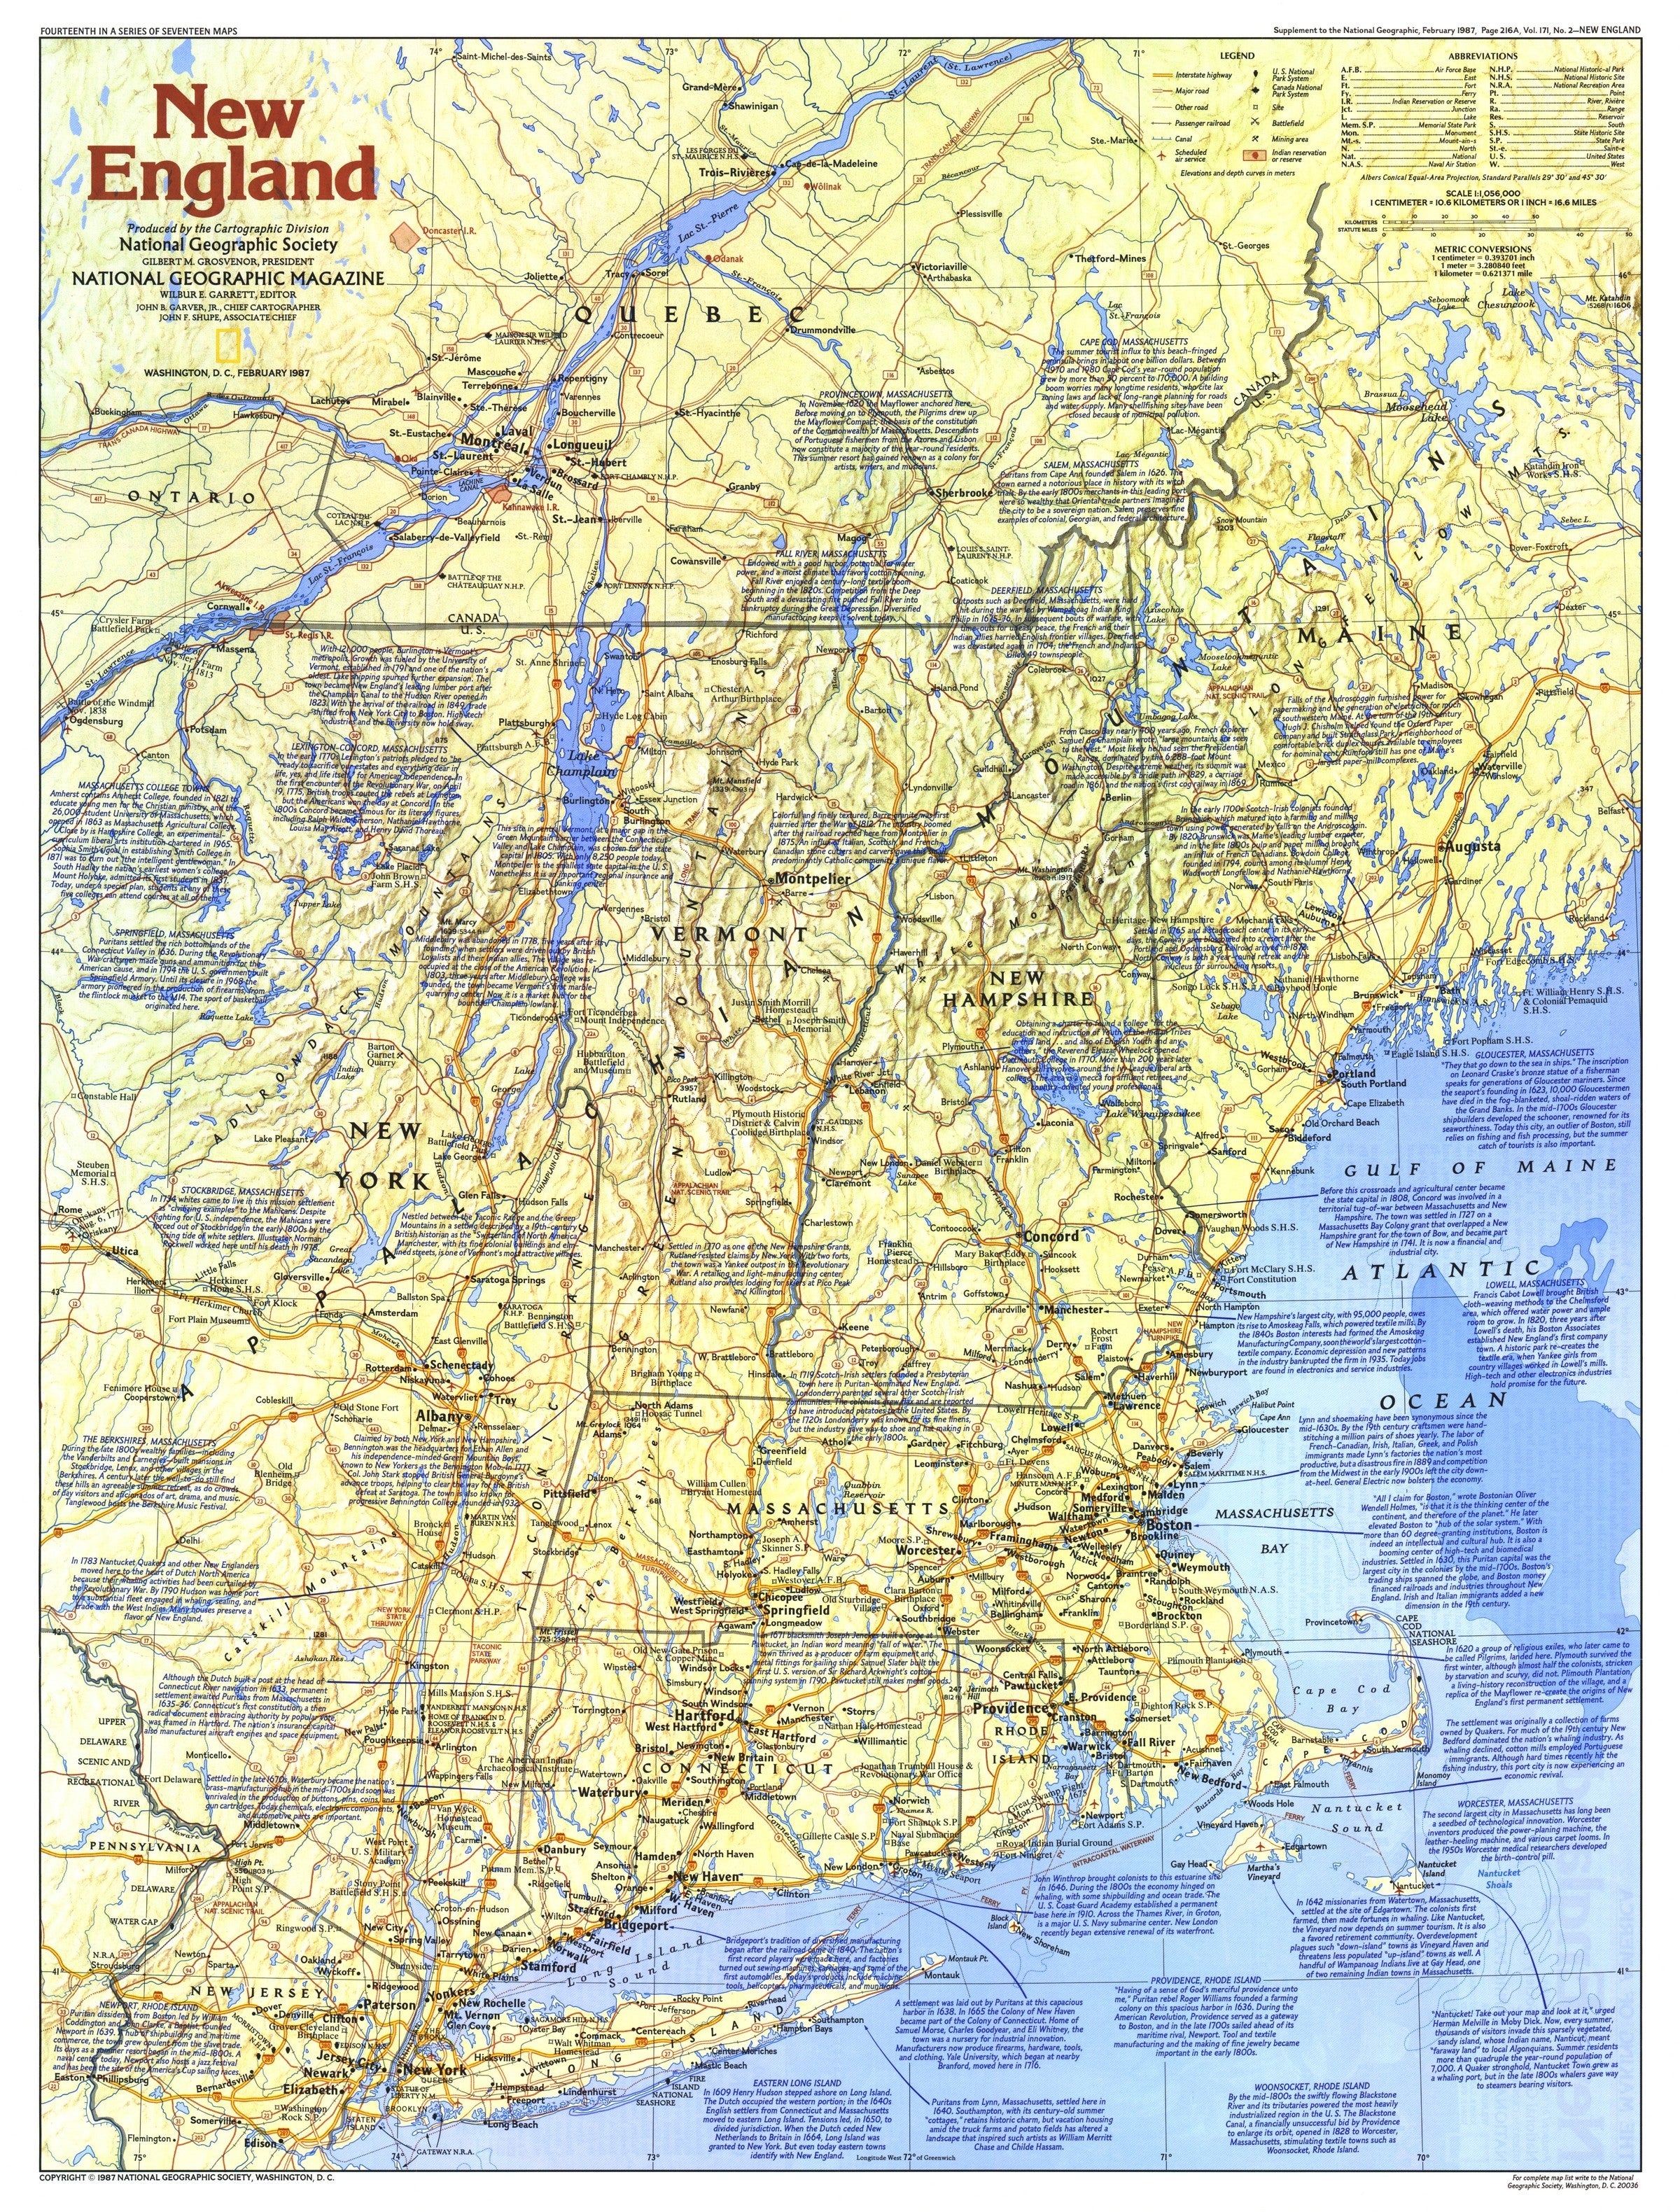 tourist map of new england states